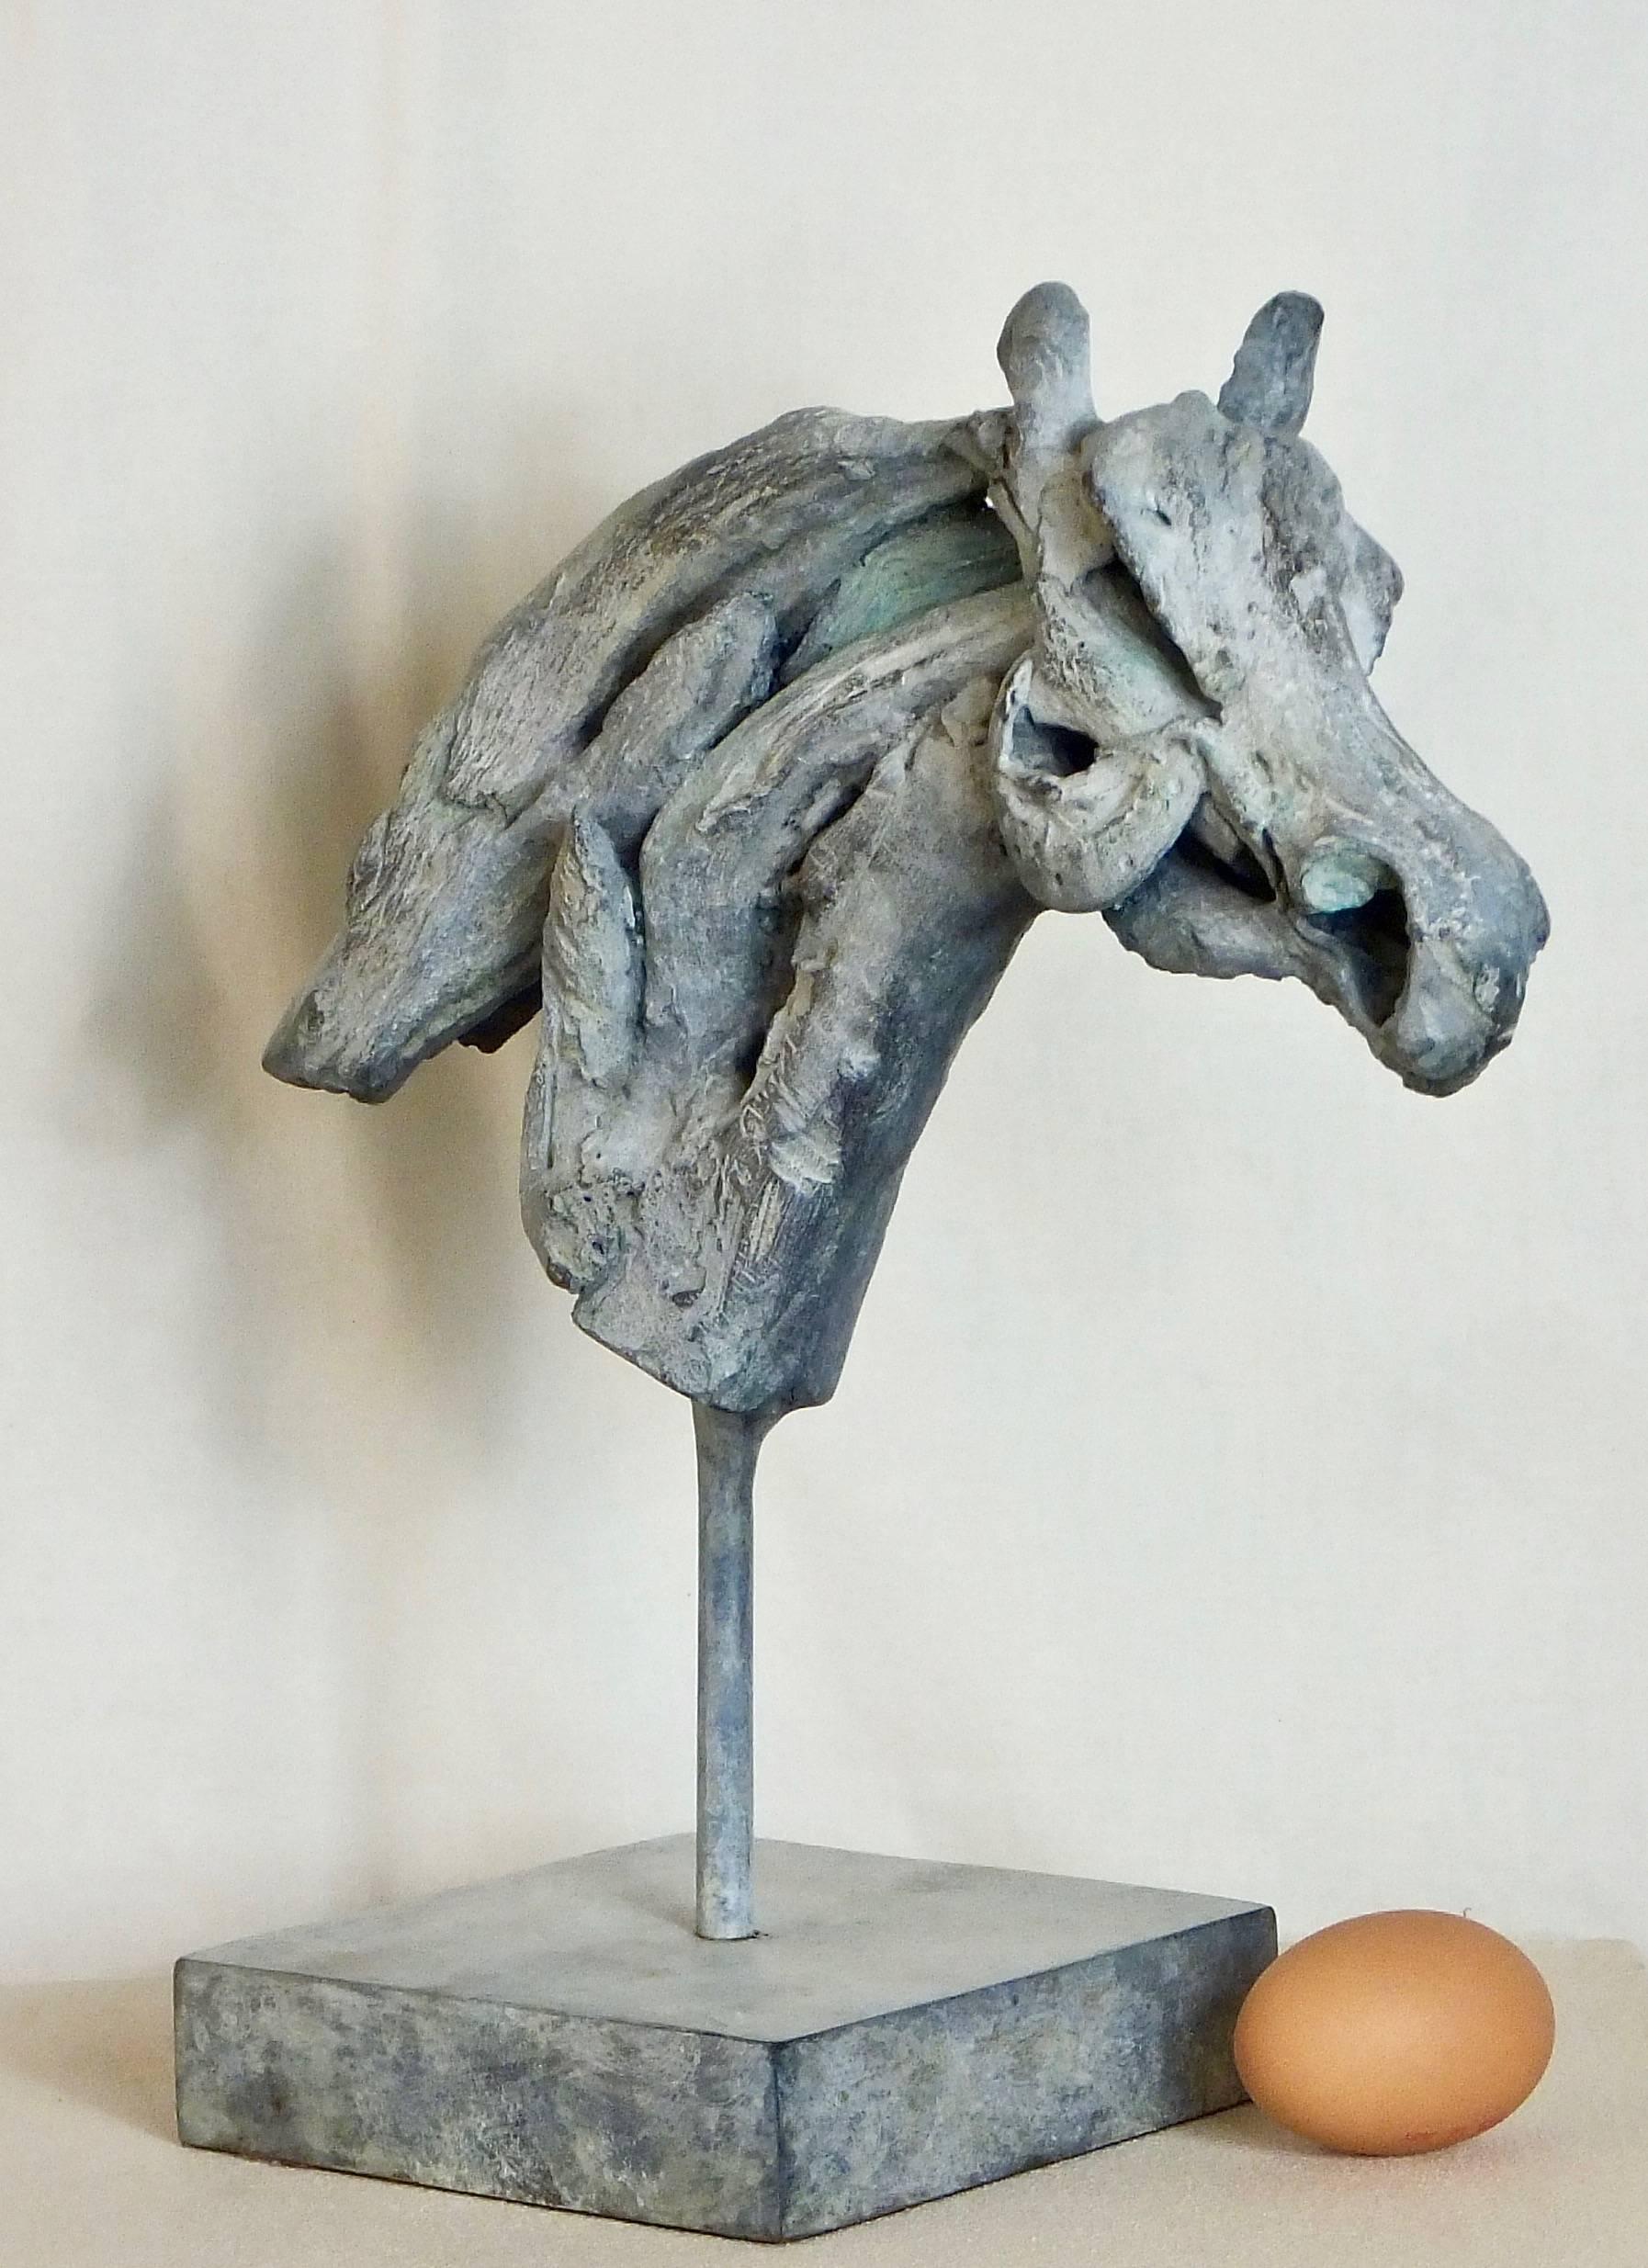 This elegant bronze sculpture , Sophia,' is in an edition of just 25 world wide . It is the bronze casting from the driftwood original from the celebrated sculptor Heather Jansch. The work is cast and finished in the UK.

We are pleased to offer